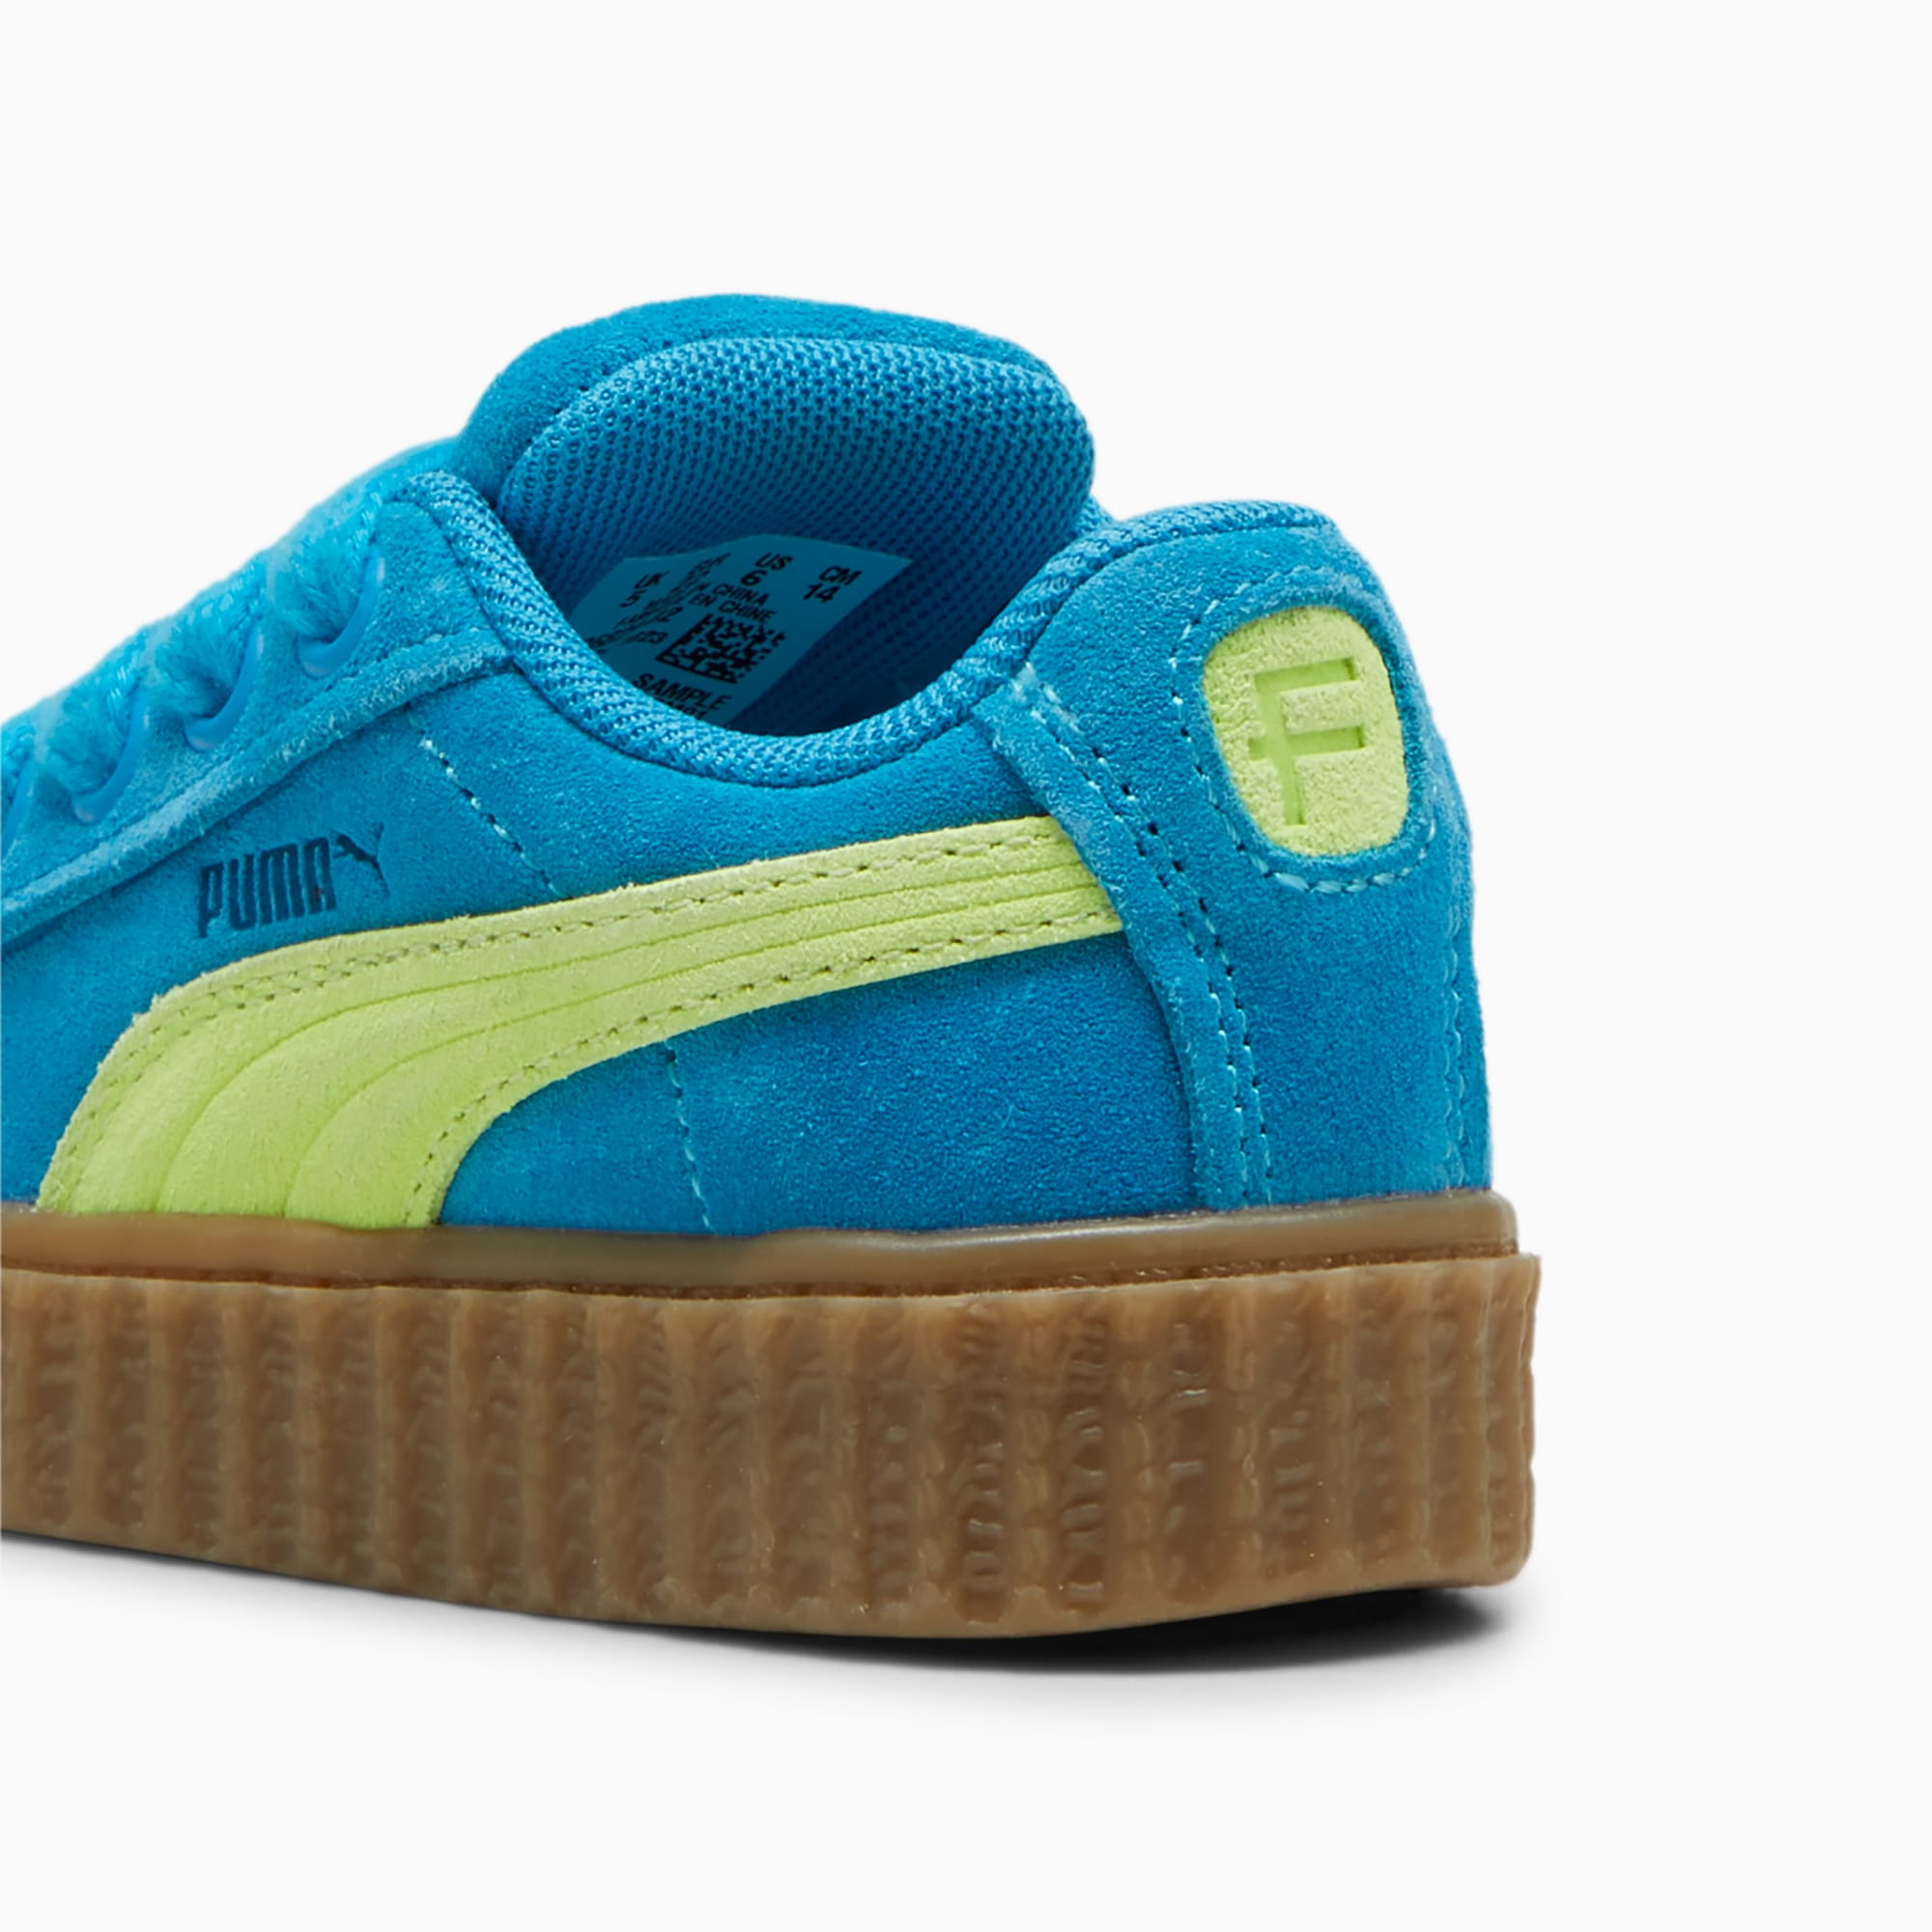 Fenty X PUMA Creeper Phatty Unisex Toddler Sneakers, Speed Blue/Lime Pow/Gum, Size 19, Accessories